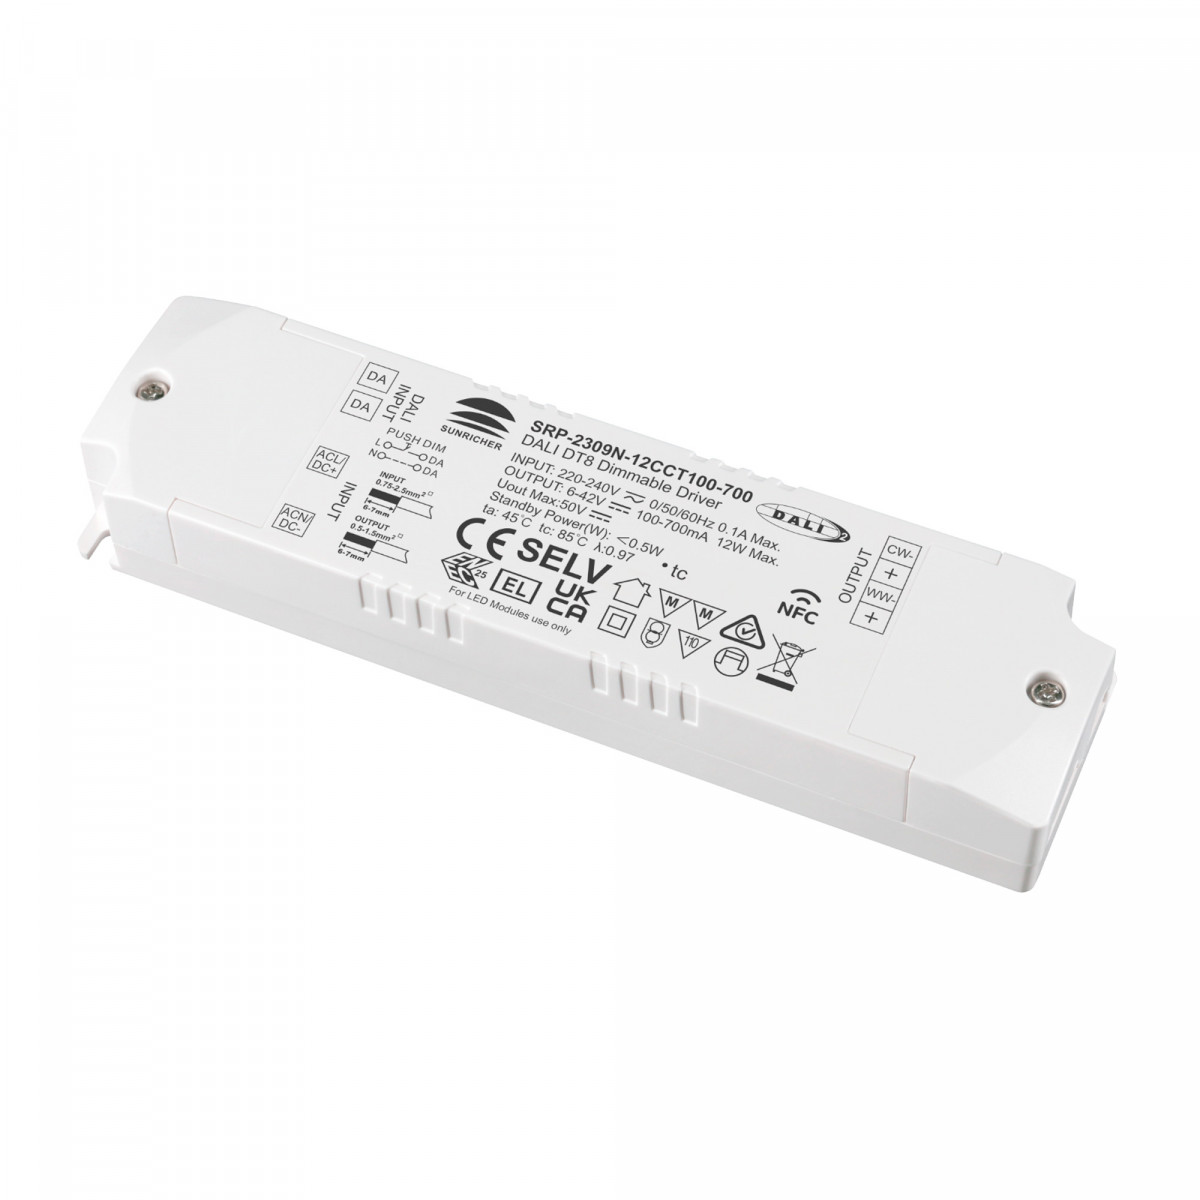 DALI dimmable DT8 CCT driver 220-240V - Output 6-42V DC - 100-700mA - 12W